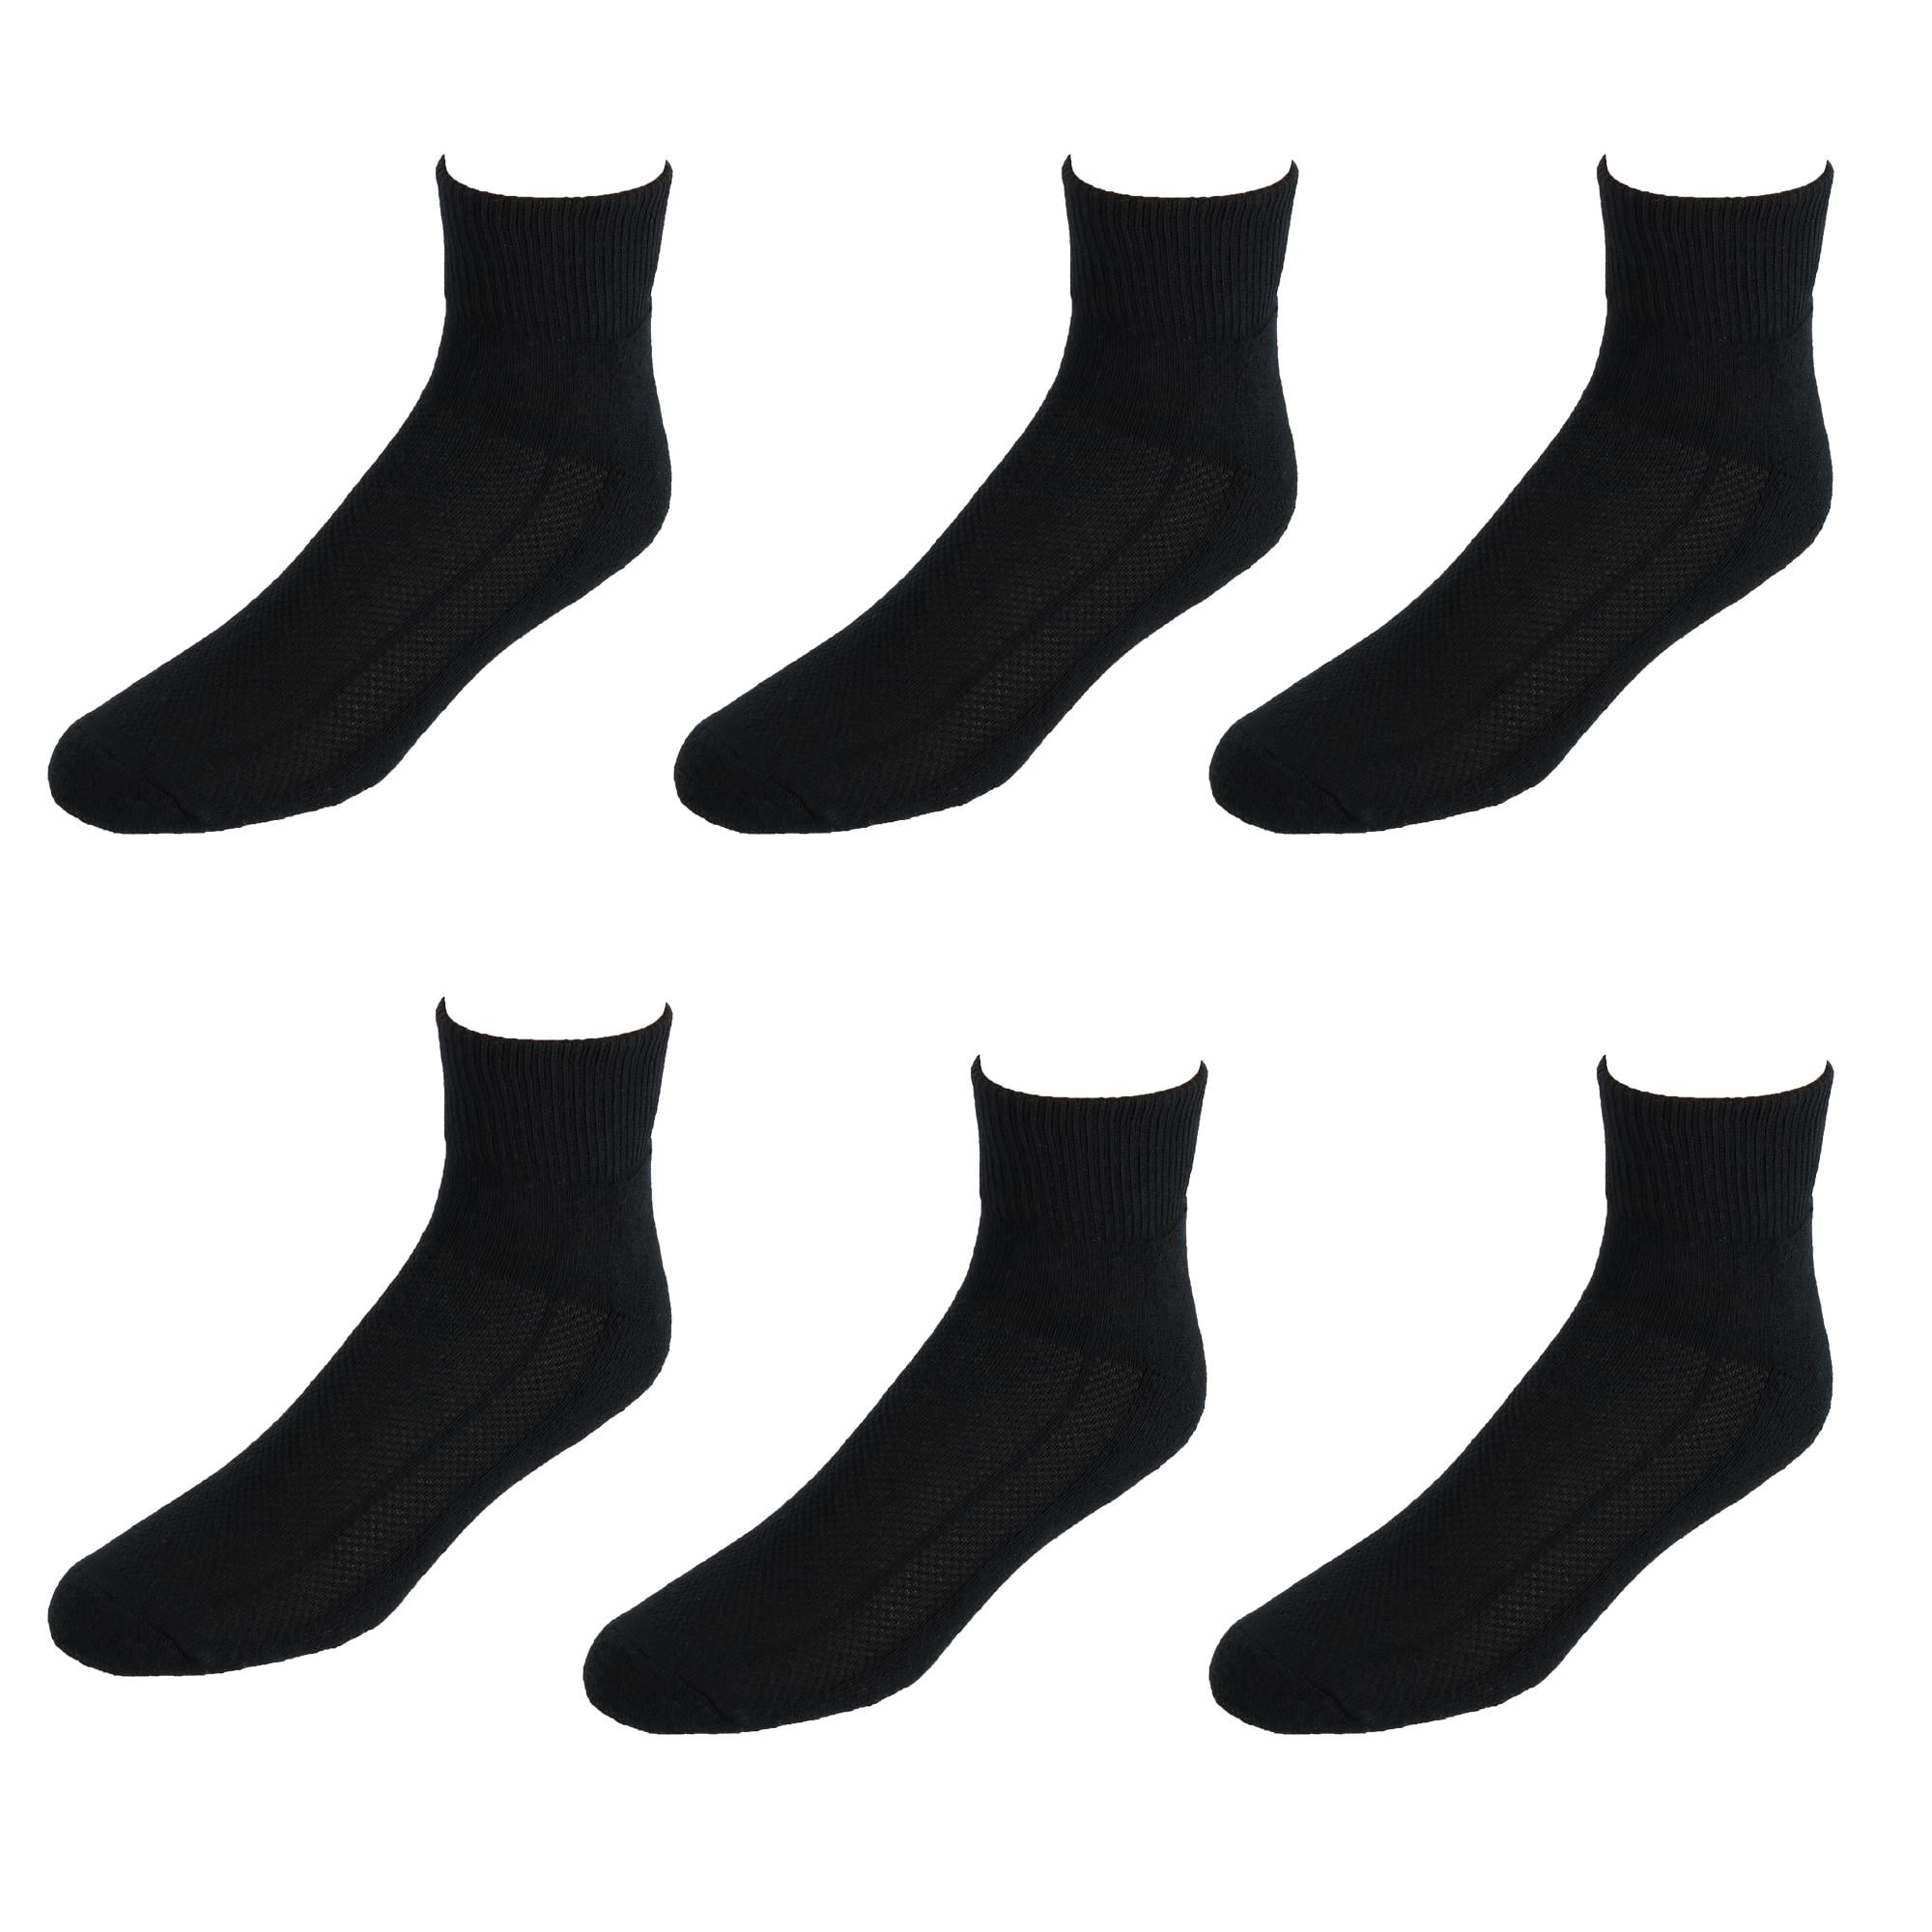 Fruit of the Loom Men's Breathable Big and Tall Ankle Socks (6 Pair ...